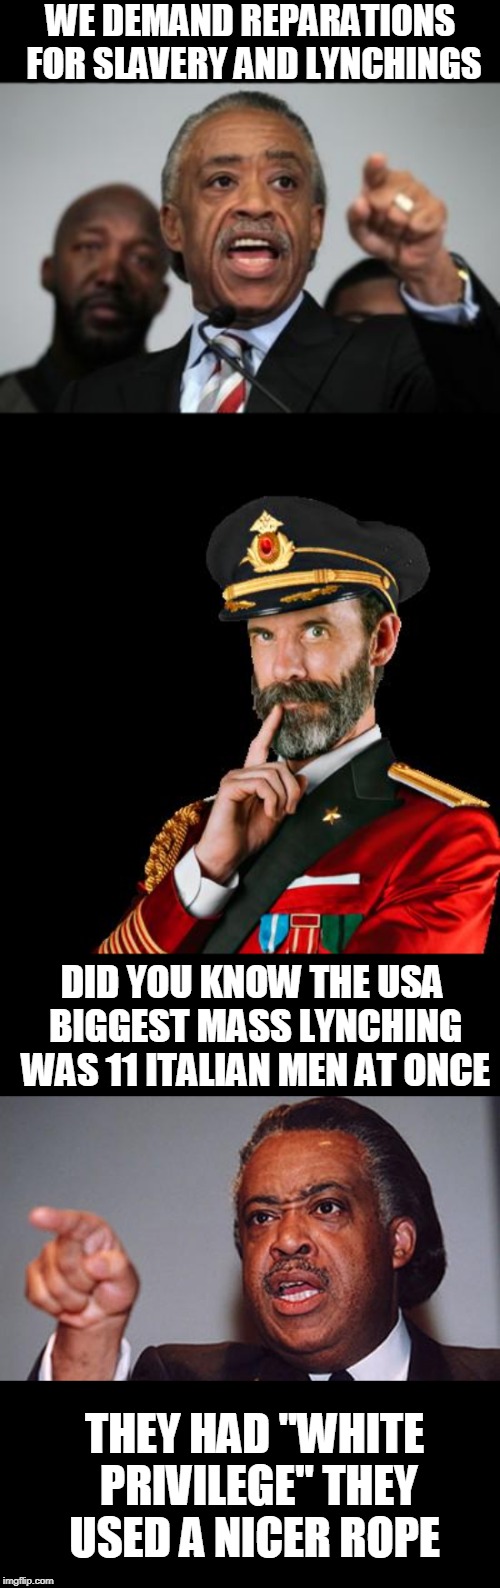 Historical FACT, look it up. | WE DEMAND REPARATIONS FOR SLAVERY AND LYNCHINGS; DID YOU KNOW THE USA BIGGEST MASS LYNCHING WAS 11 ITALIAN MEN AT ONCE; THEY HAD "WHITE PRIVILEGE" THEY USED A NICER ROPE | image tagged in al sharpton,politics,fact,reparations | made w/ Imgflip meme maker